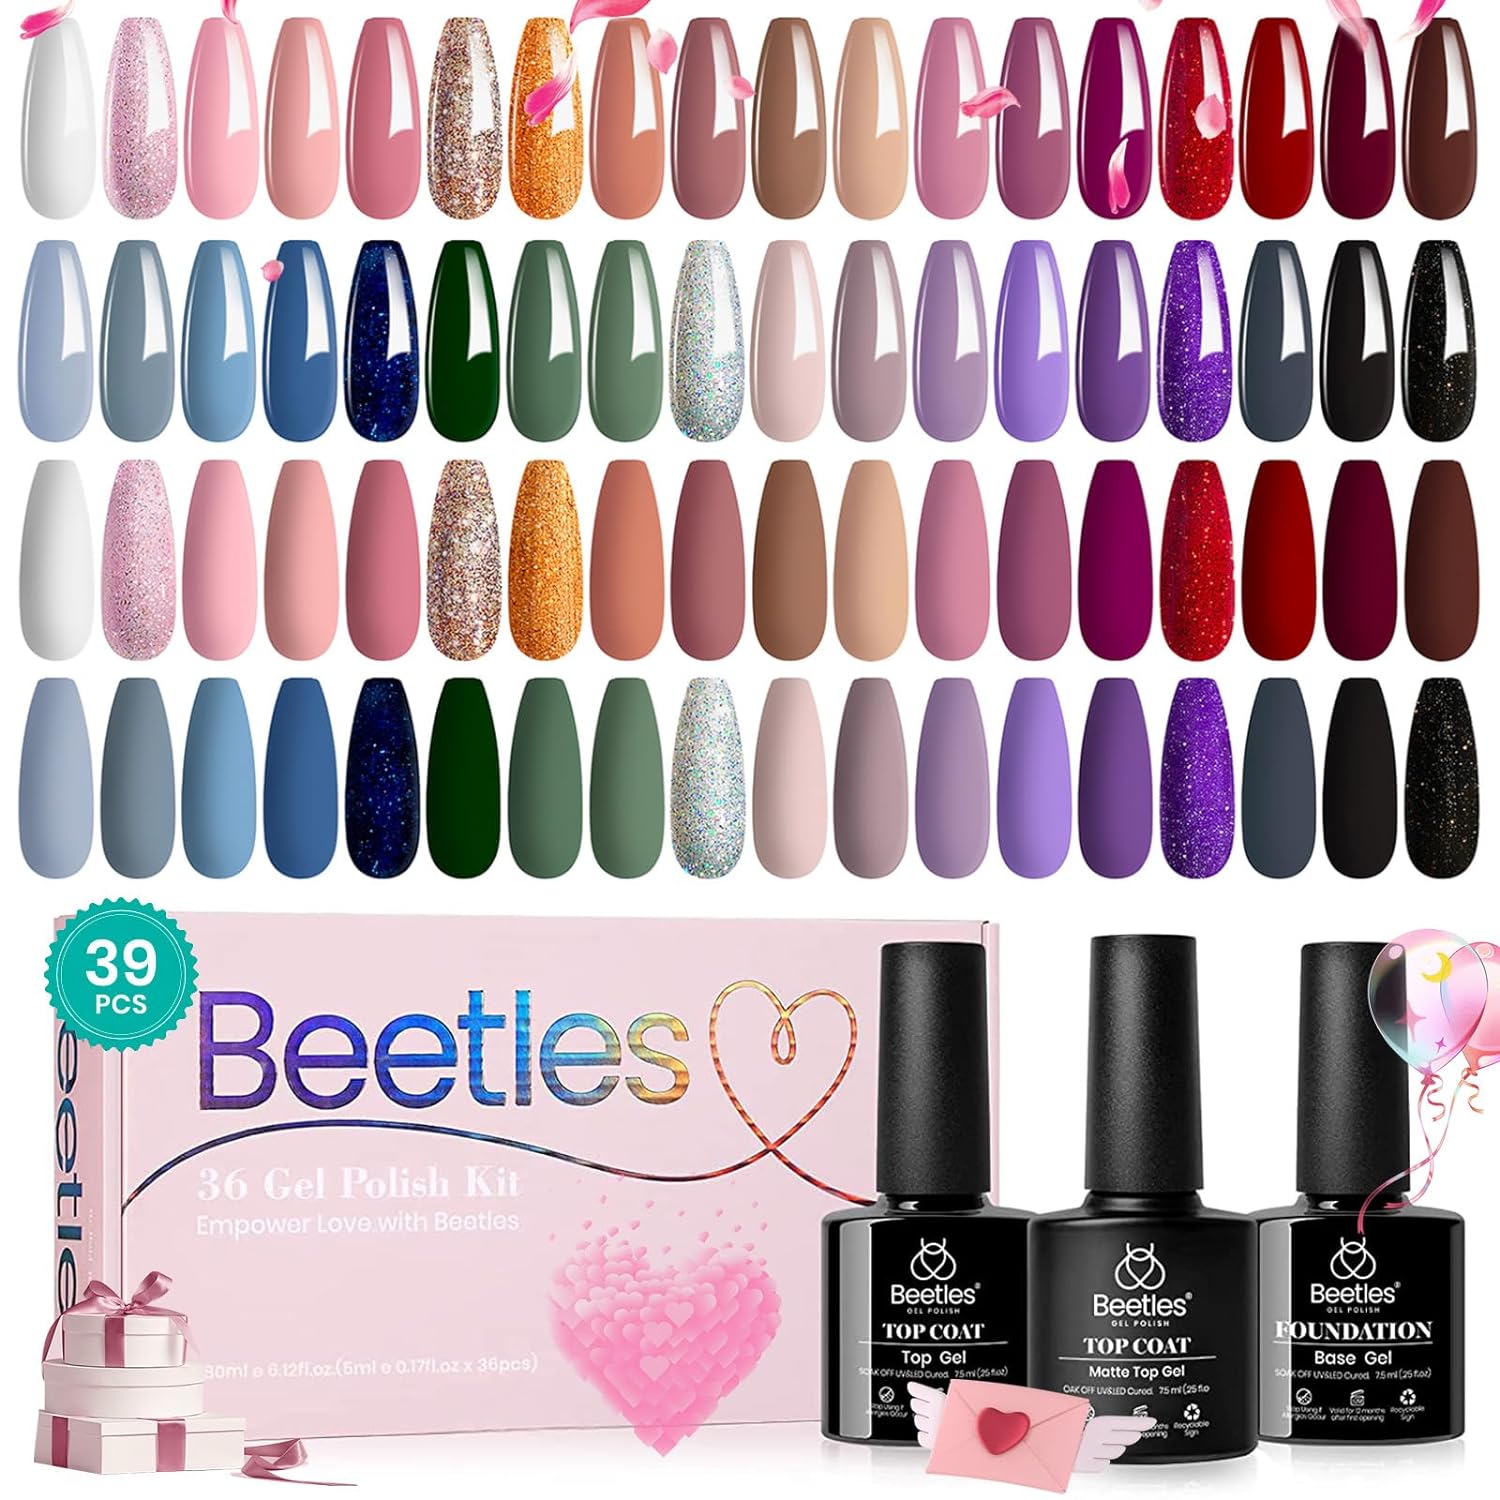 Dazzling Radiant 36 Nail Gel Polish Colors with Base Top Coat and Gift Box- 5ml/Each Gel Colors